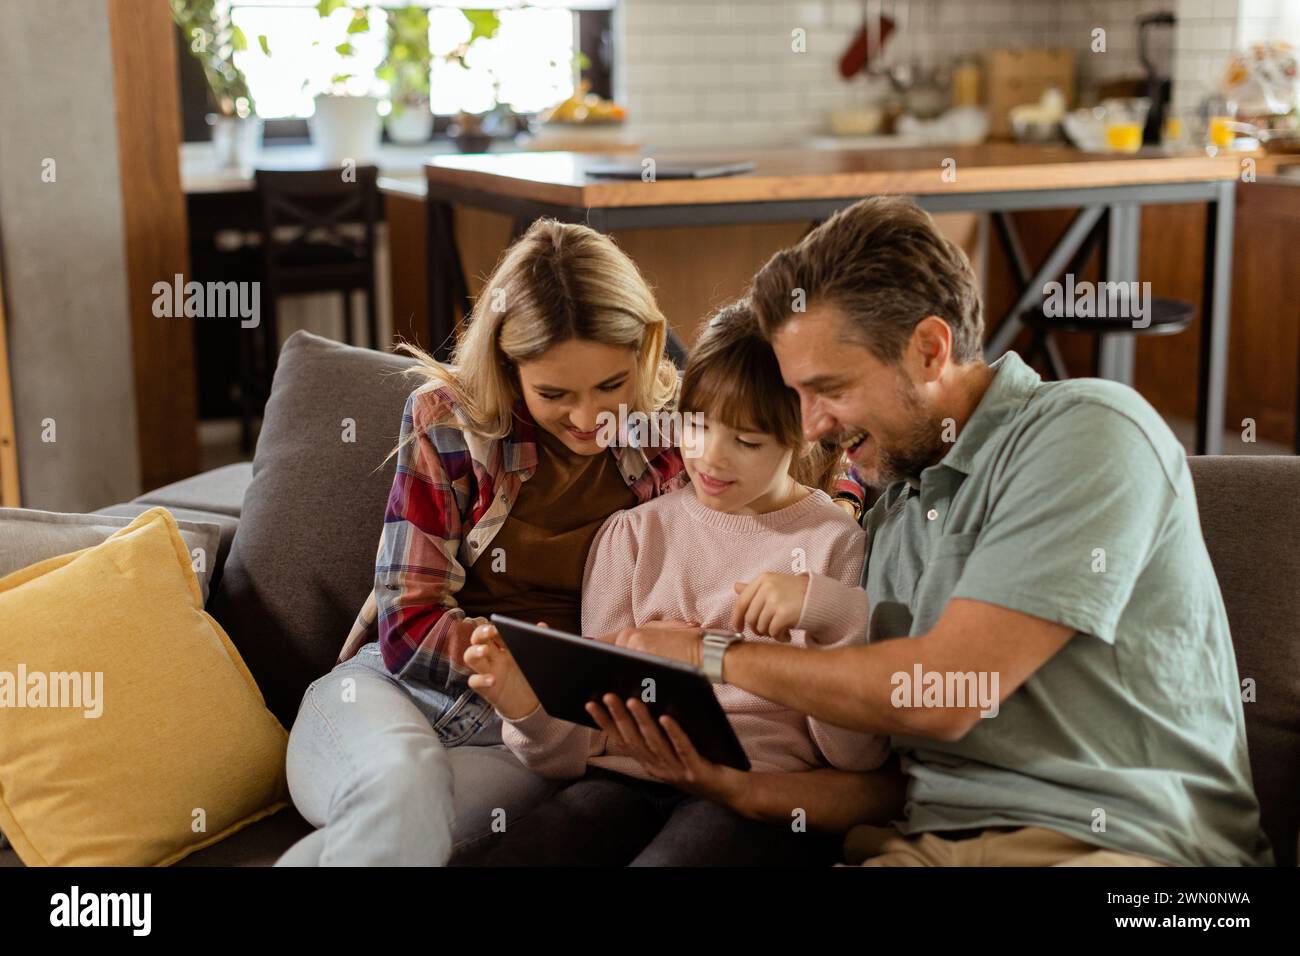 Joyful family shares a moment around a digital tablet, with smiles and togetherness in a warm home setting Stock Photo